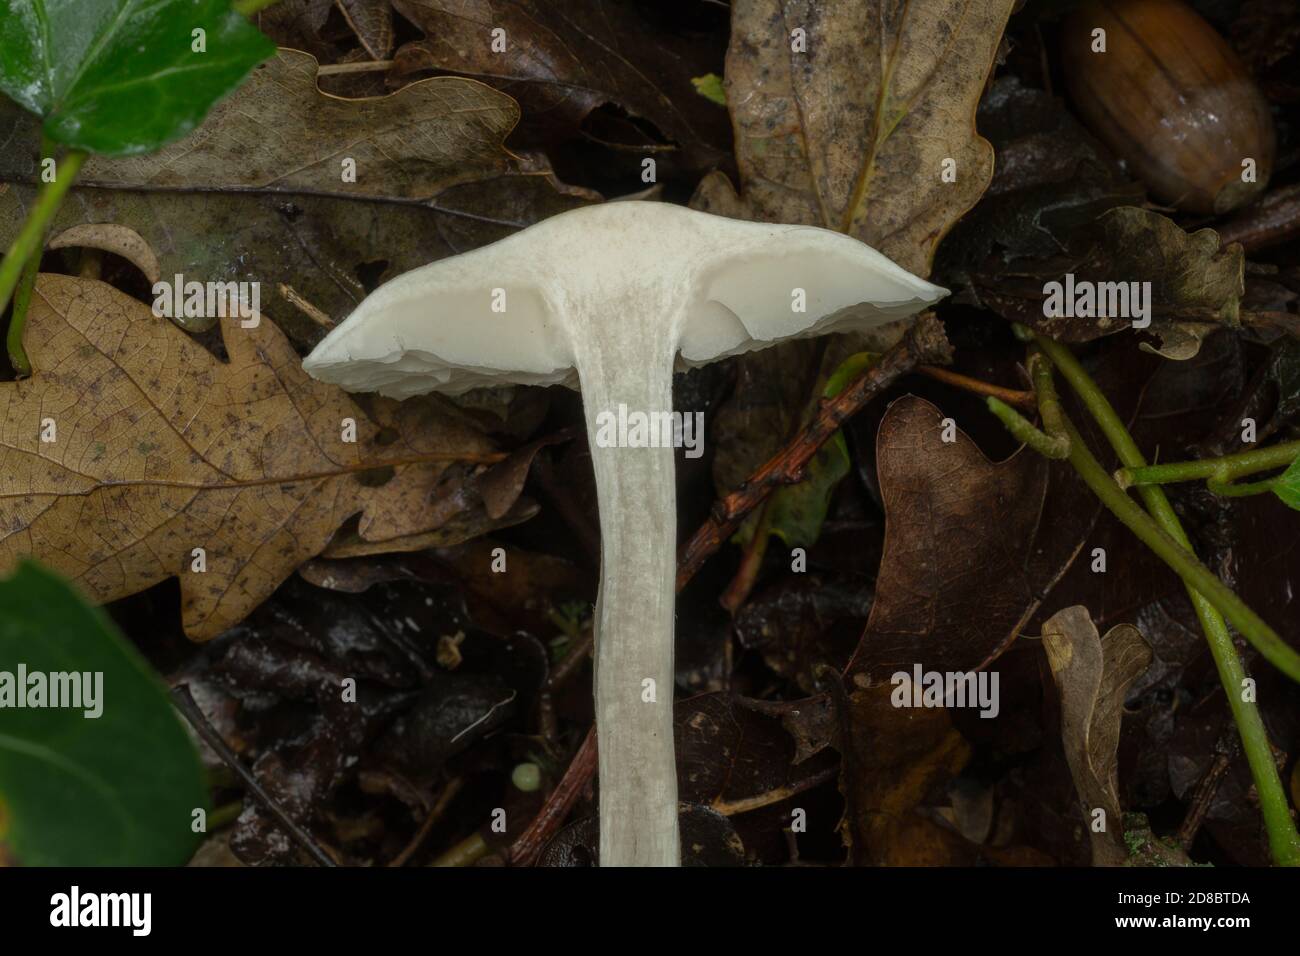 A cross-section of the sweetbread mushroom or clitopilus prunulus. Stock Photo